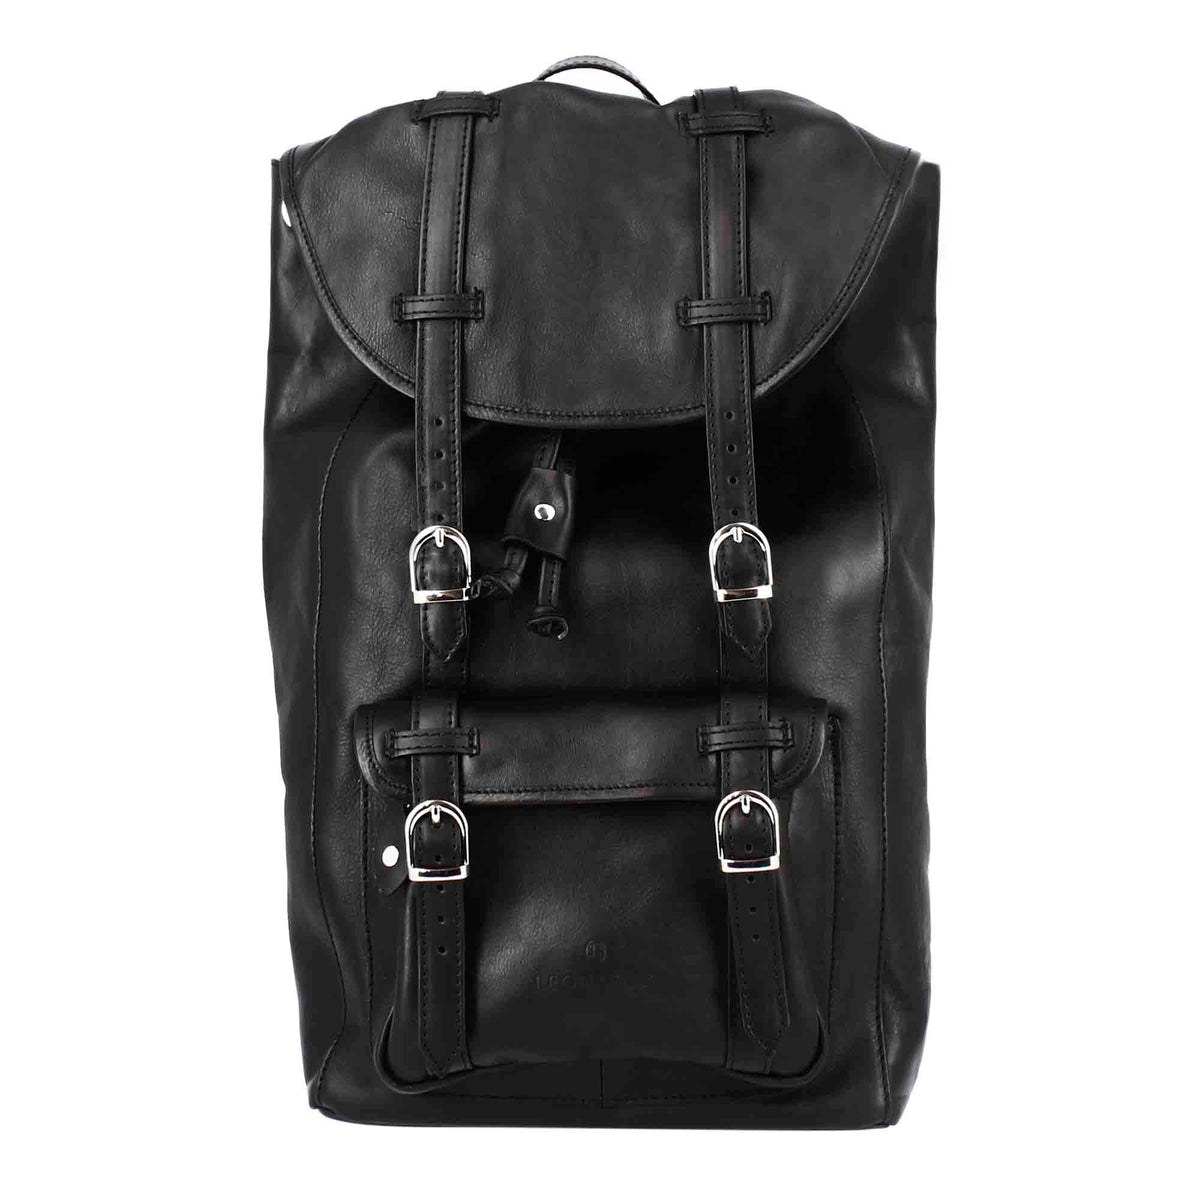 Black leather travel backpack with buckles